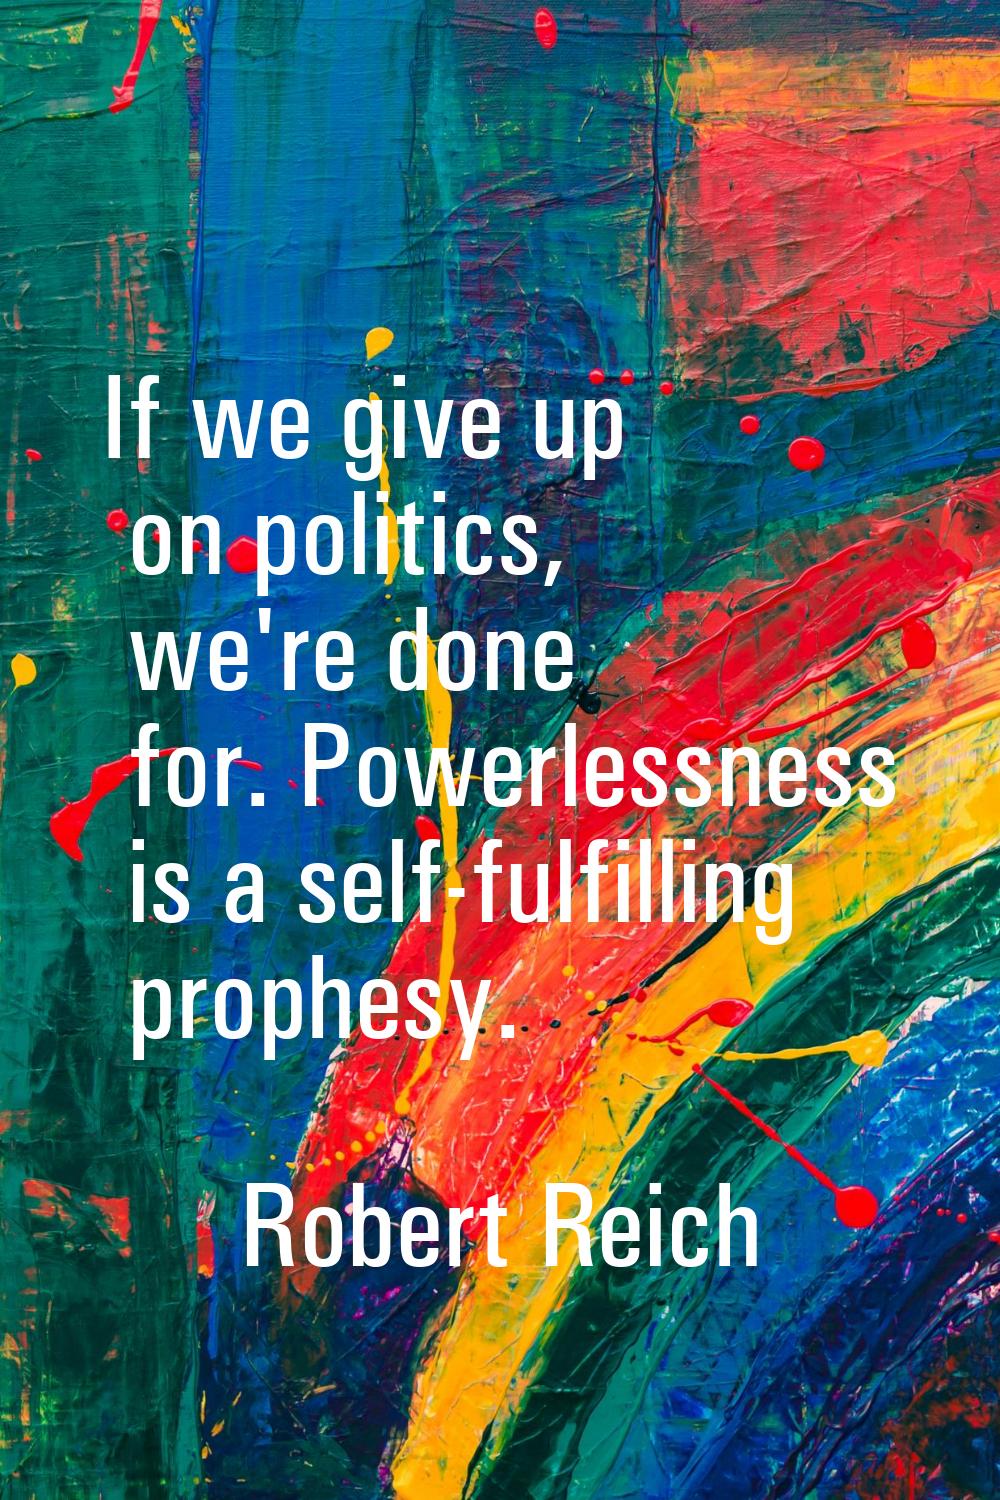 If we give up on politics, we're done for. Powerlessness is a self-fulfilling prophesy.